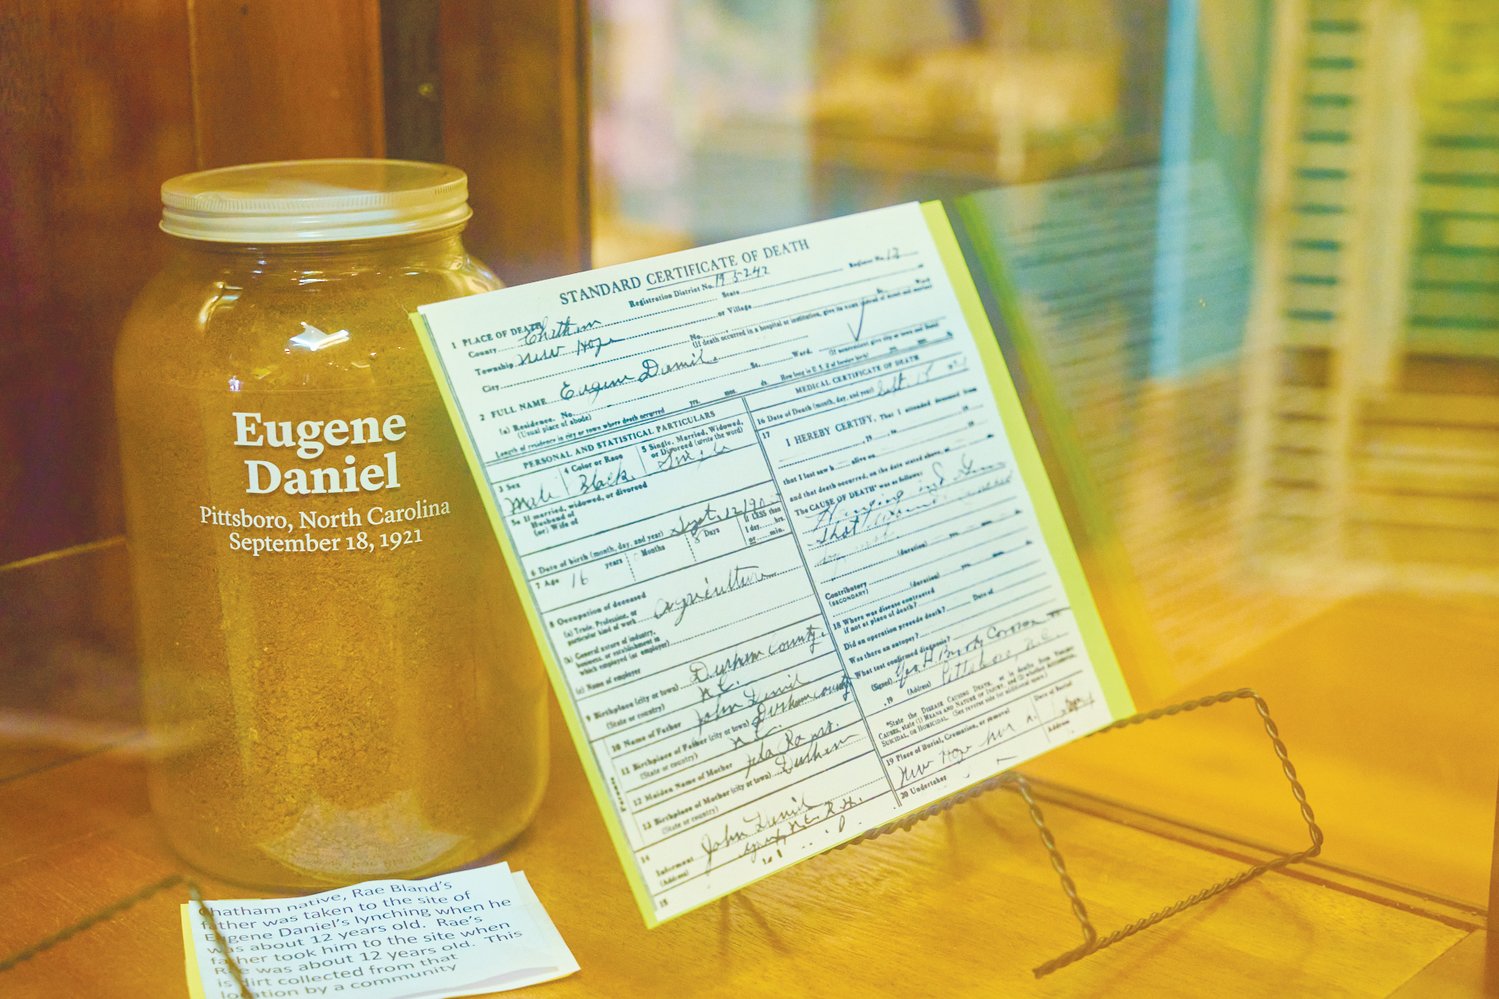 The soil from Eugene Daniel's lynching site is on display at the Chatham County Historical Museum's Black history exhibit.